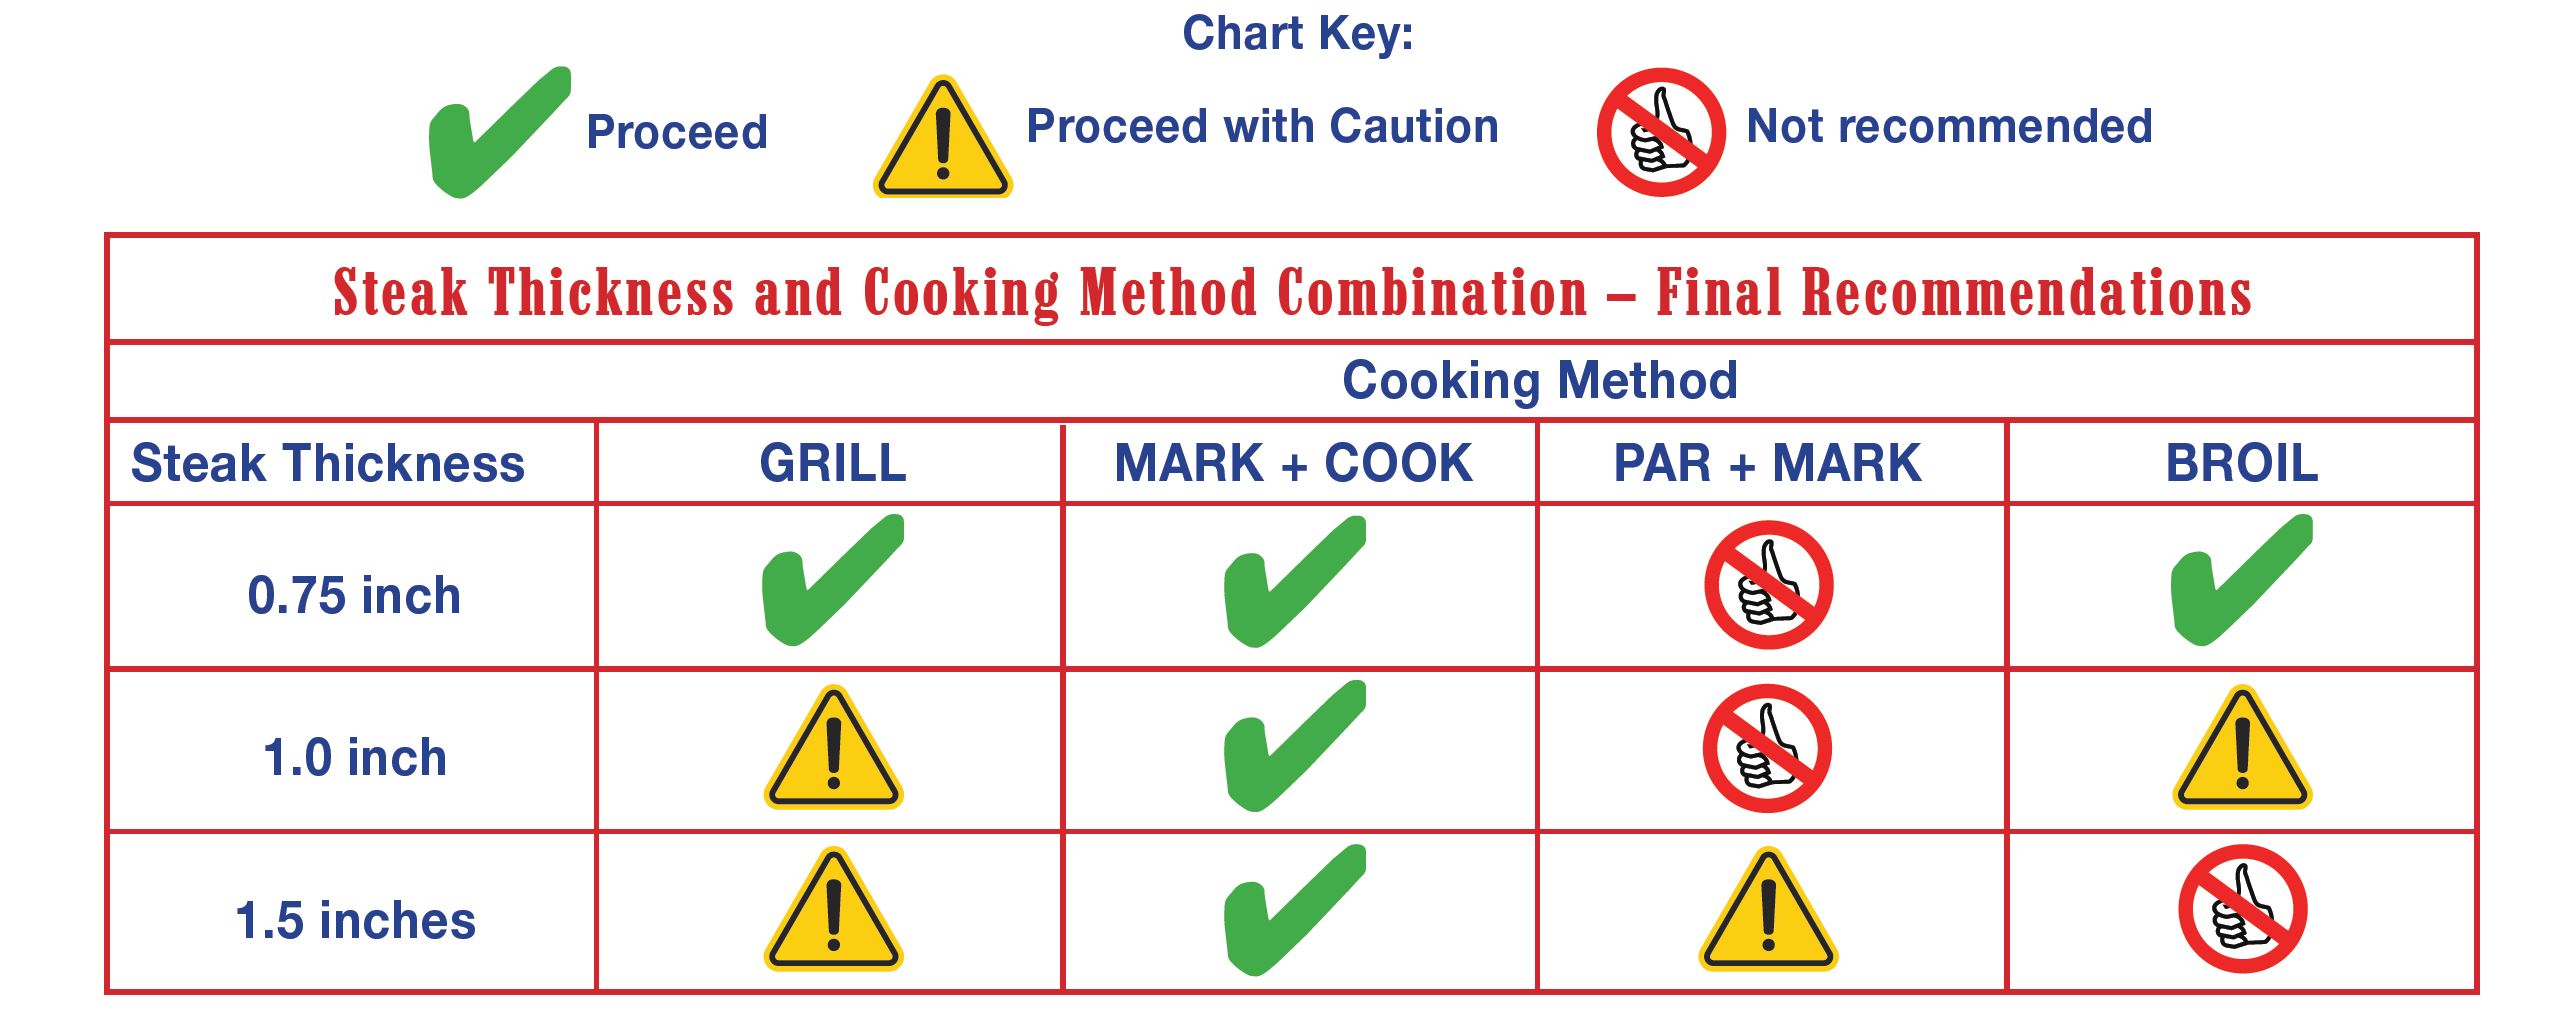 cooking-method-reco